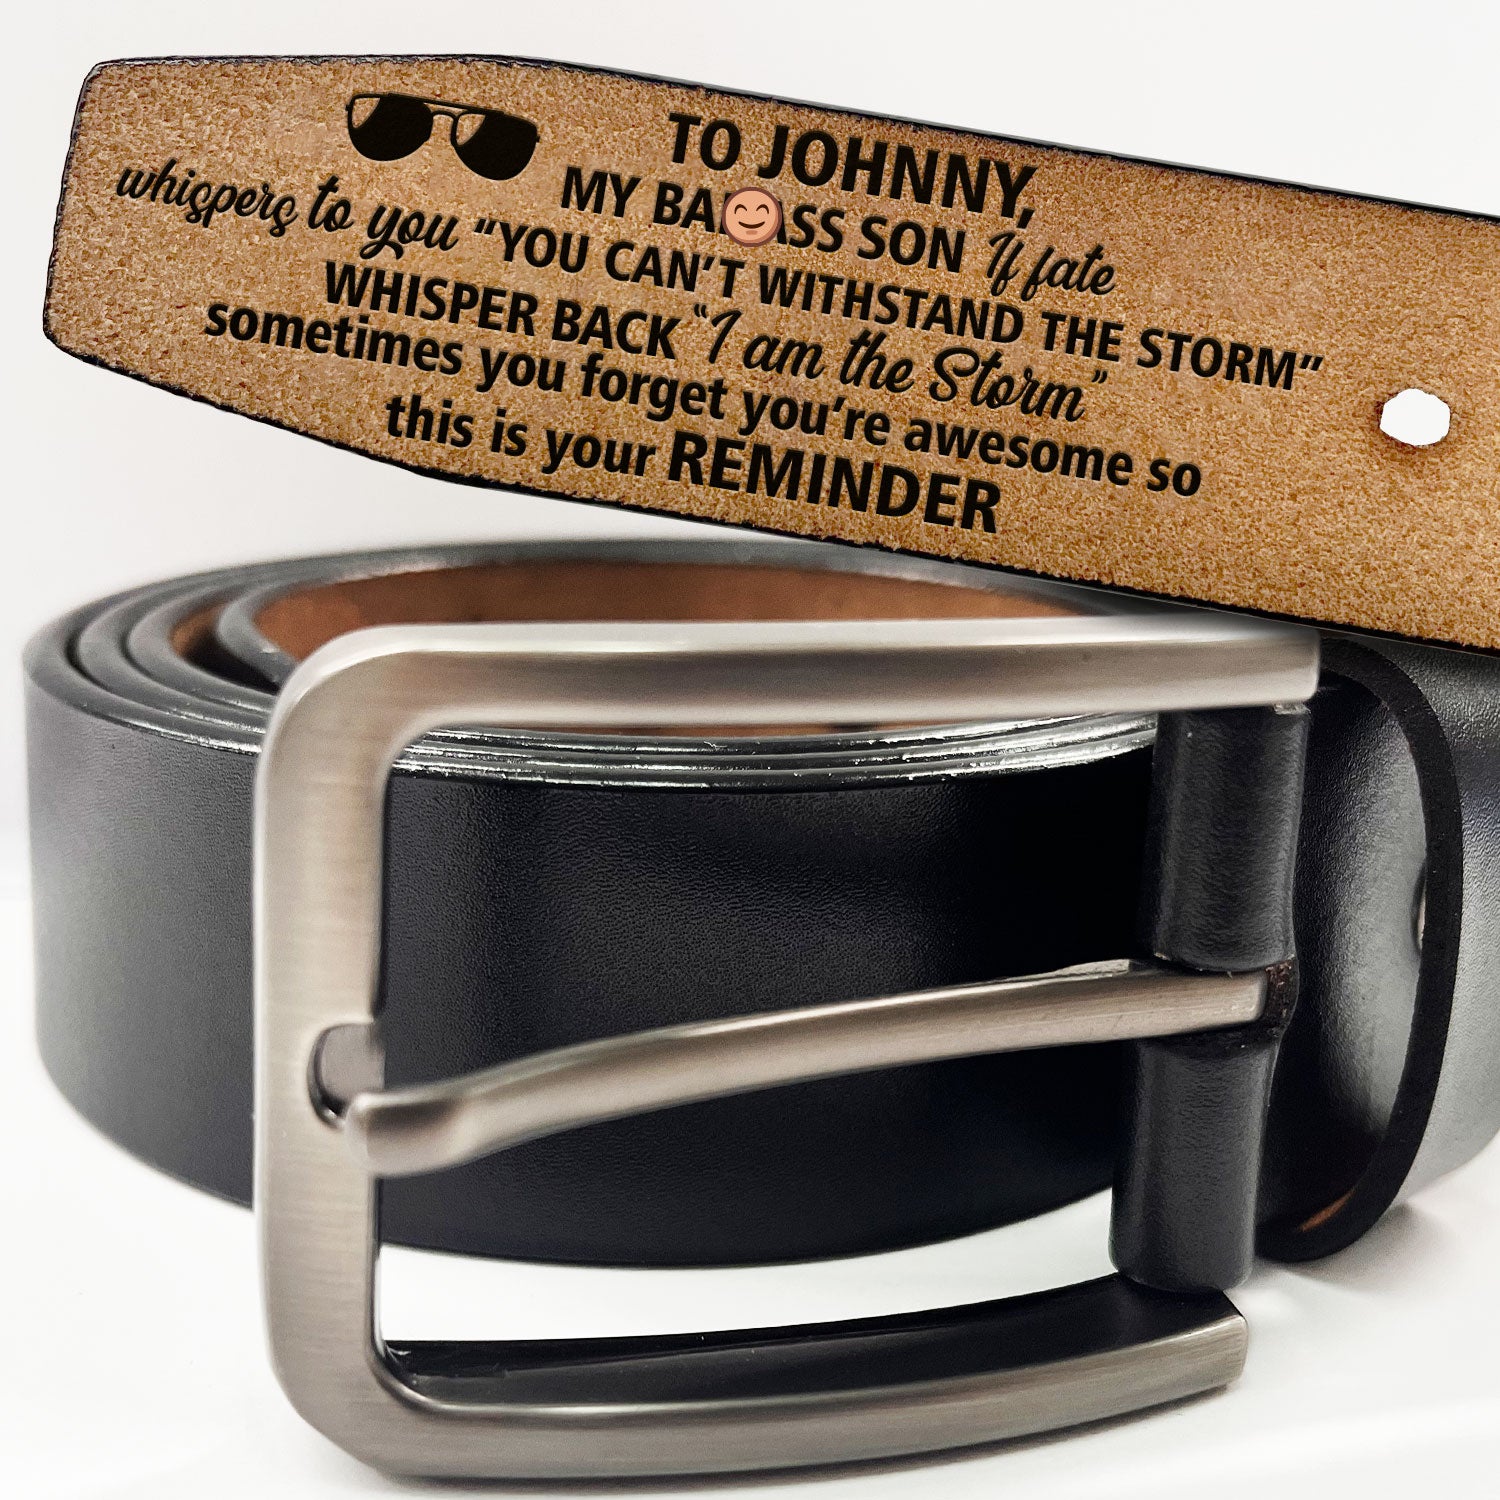 To My Son This Is Your Reminder - Birthday, Loving Gift For Son, Grandson, Niece - Personalized Engraved Leather Belt